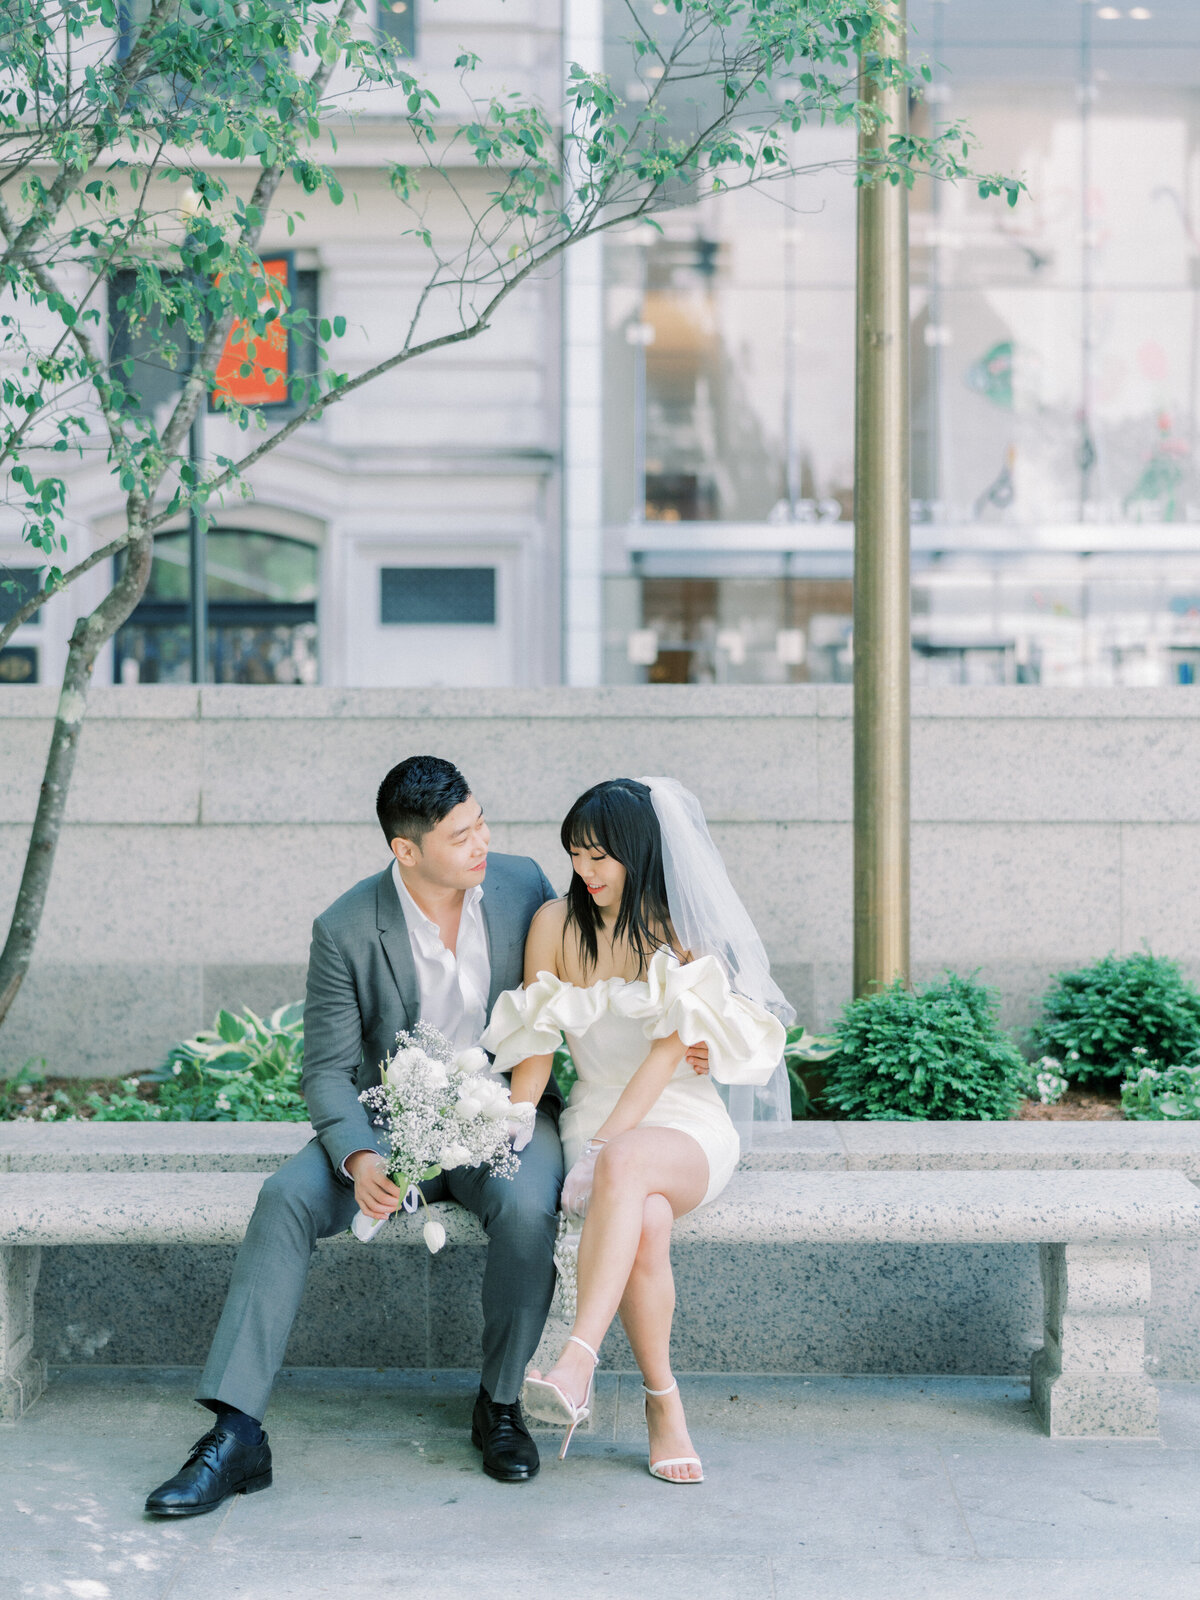 Vogue Editiorial NYC Elopement Themed Engagement Session Highlights | Amarachi Ikeji Photography 13